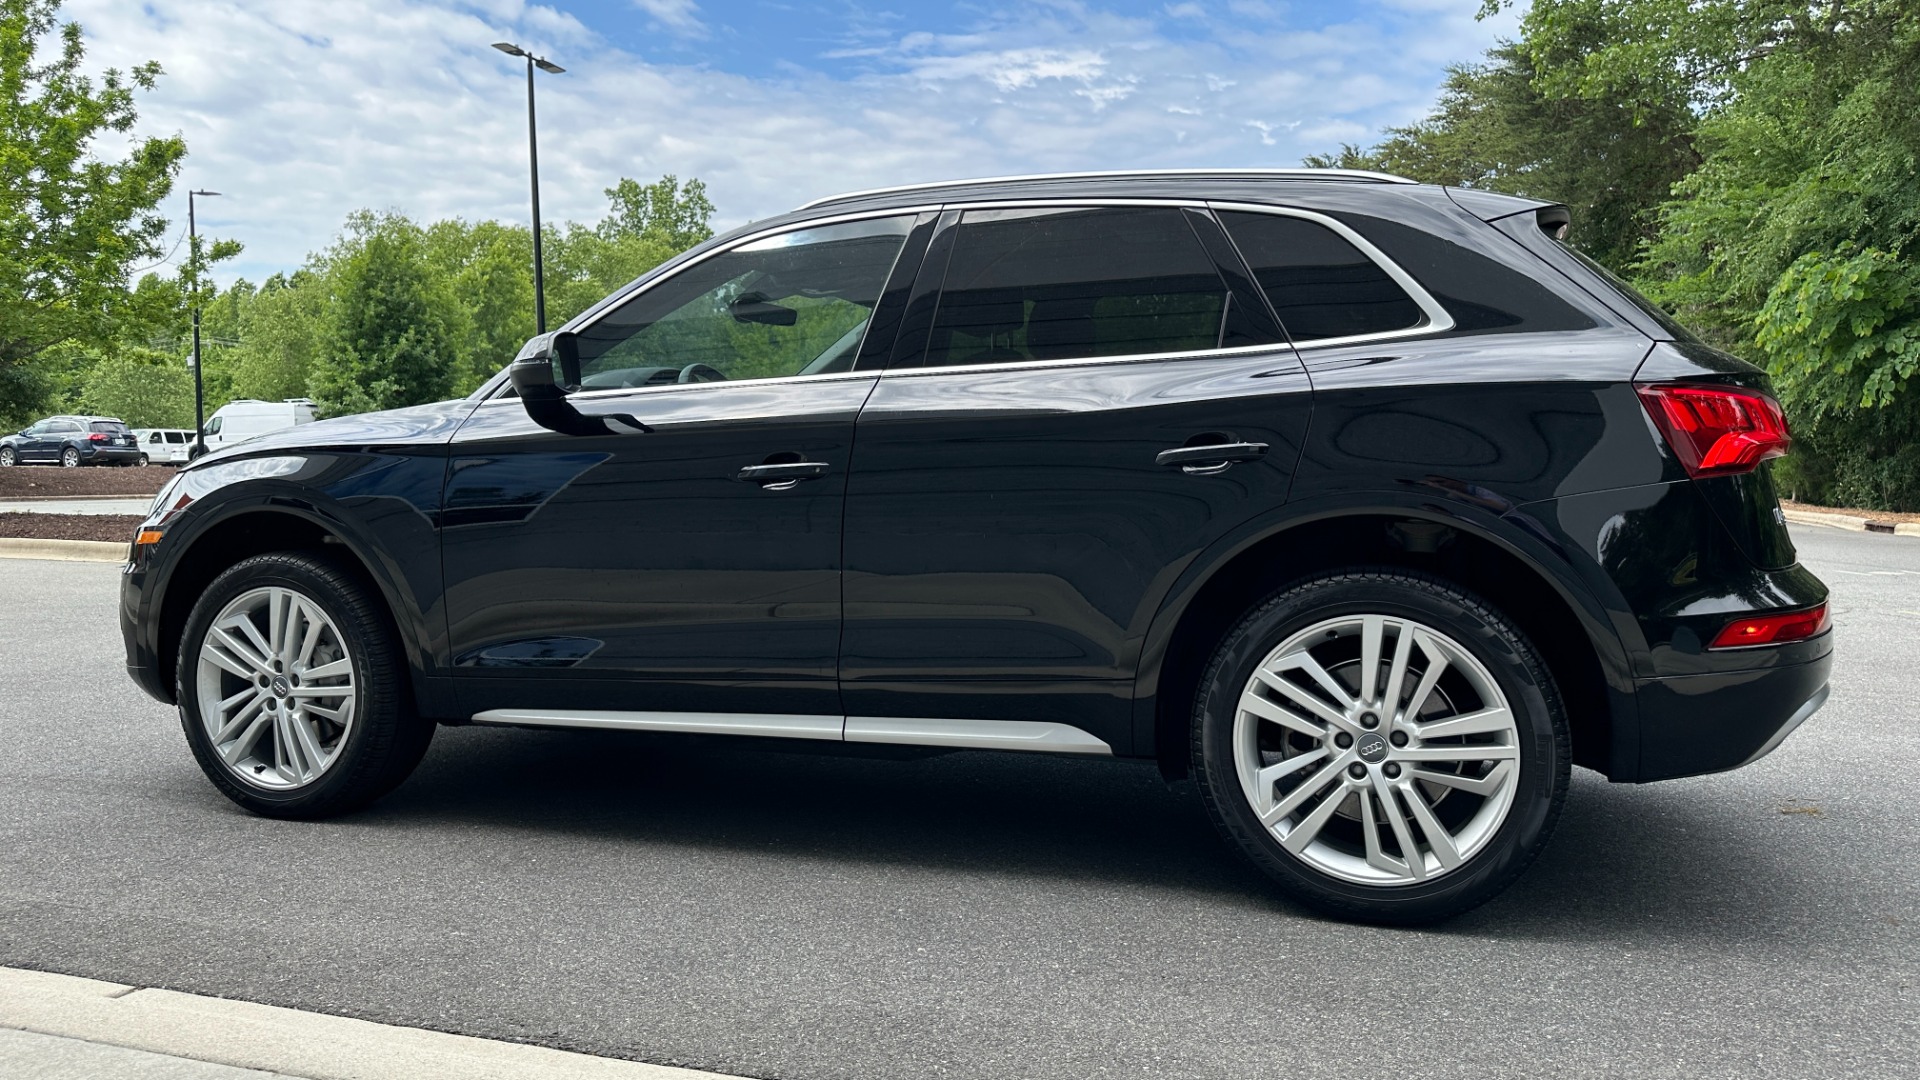 Used 2018 Audi Q5 PRESTIGE / DRIVER ASSISTANCE / COLD WEATHER / WOOD INLAYS for sale $25,995 at Formula Imports in Charlotte NC 28227 4